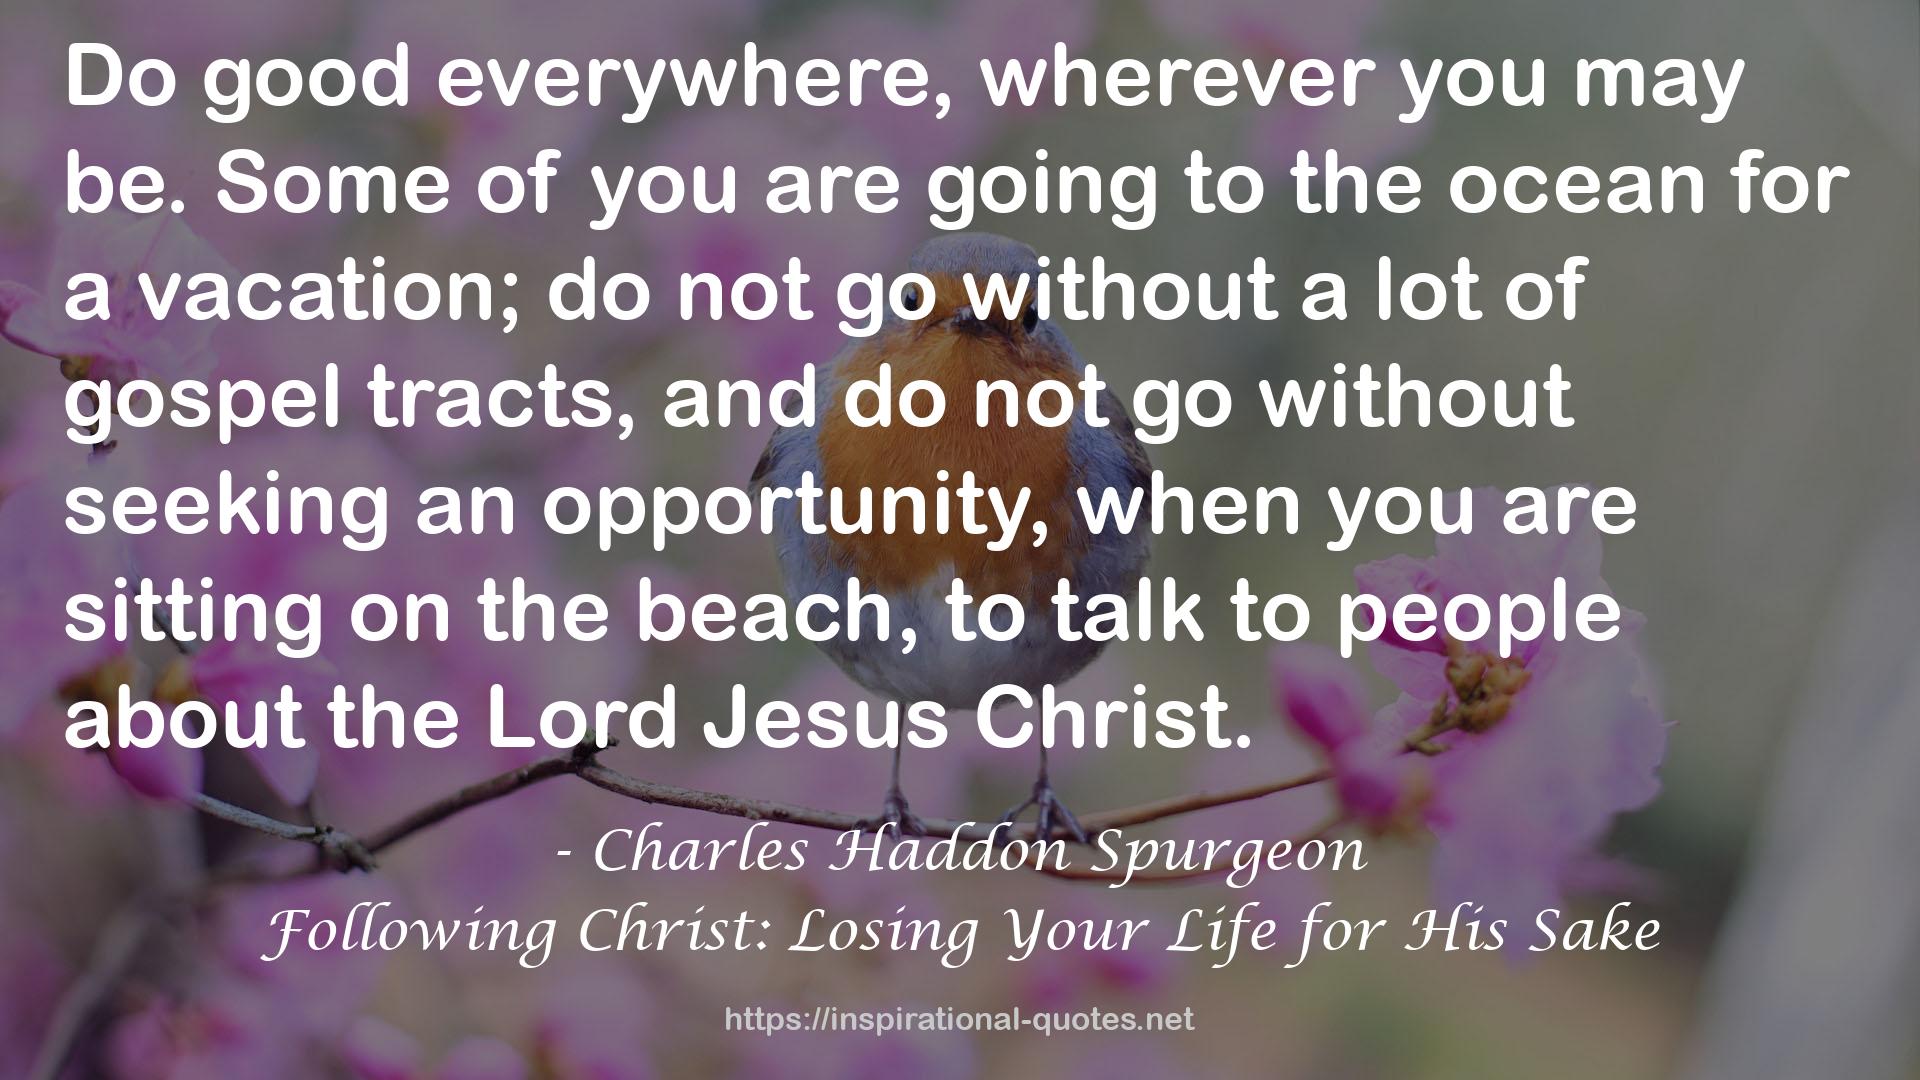 Following Christ: Losing Your Life for His Sake QUOTES